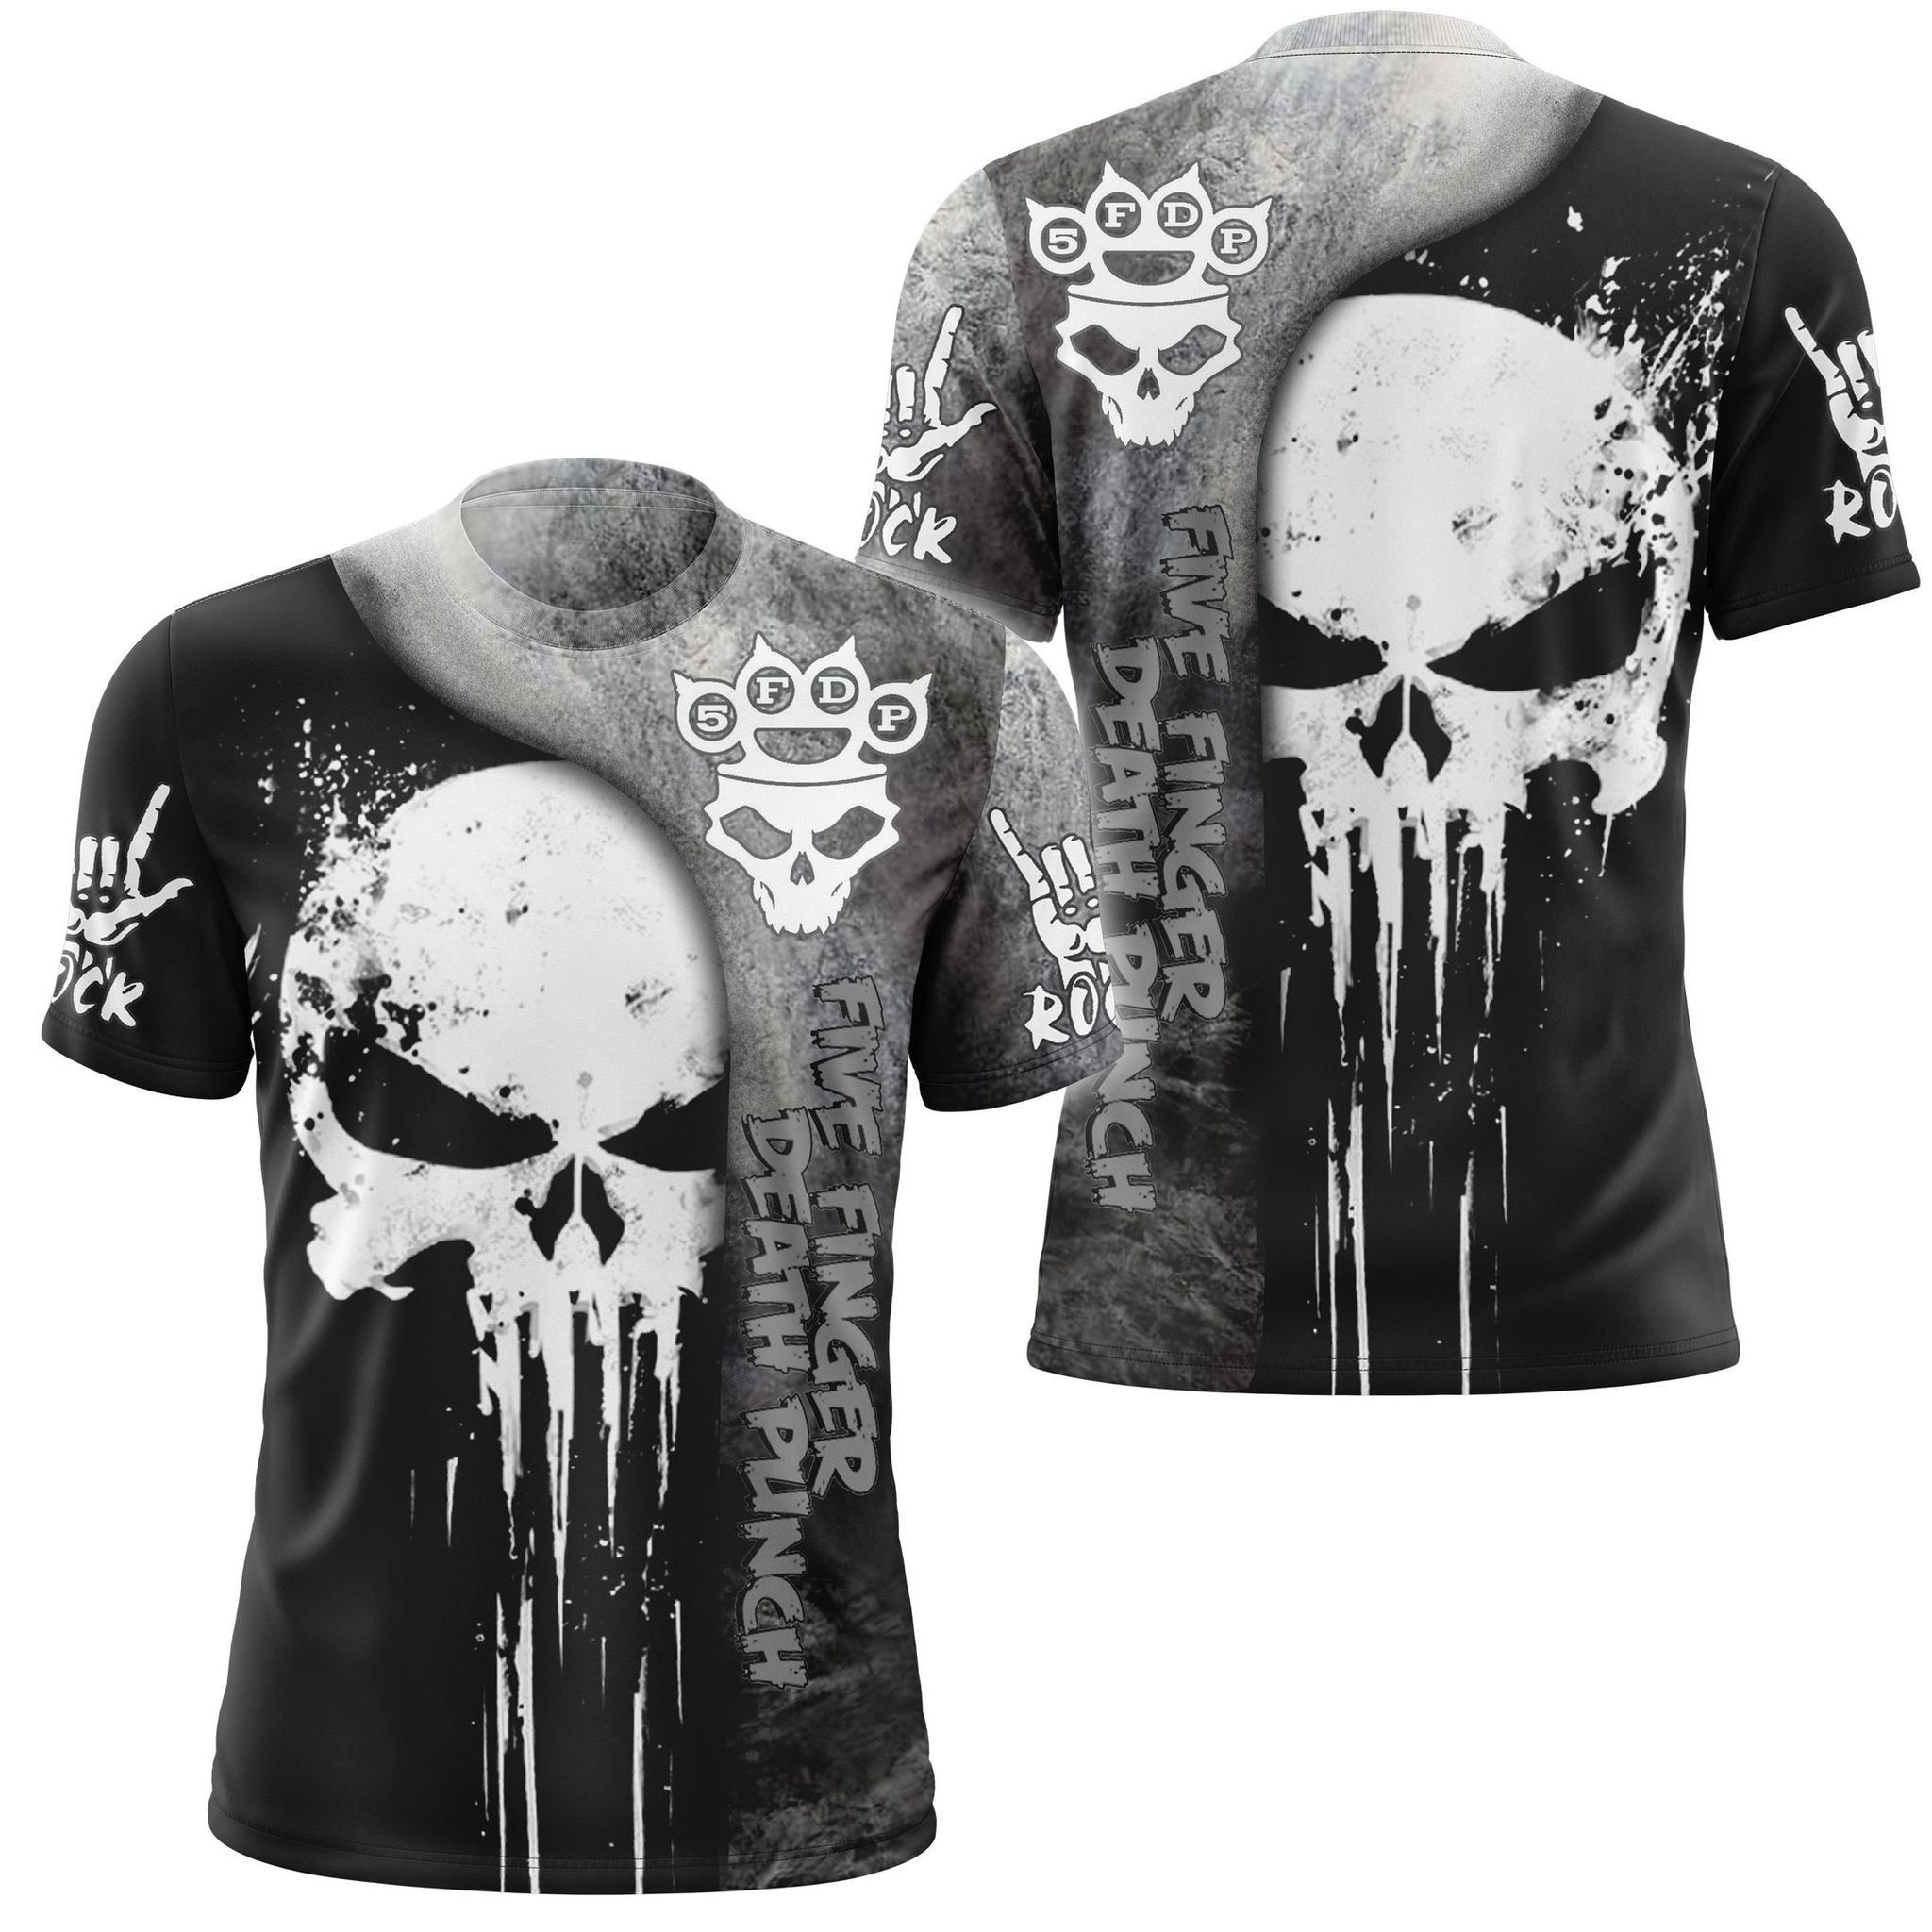 Skull five finger death punch 3d hoodie and shirt